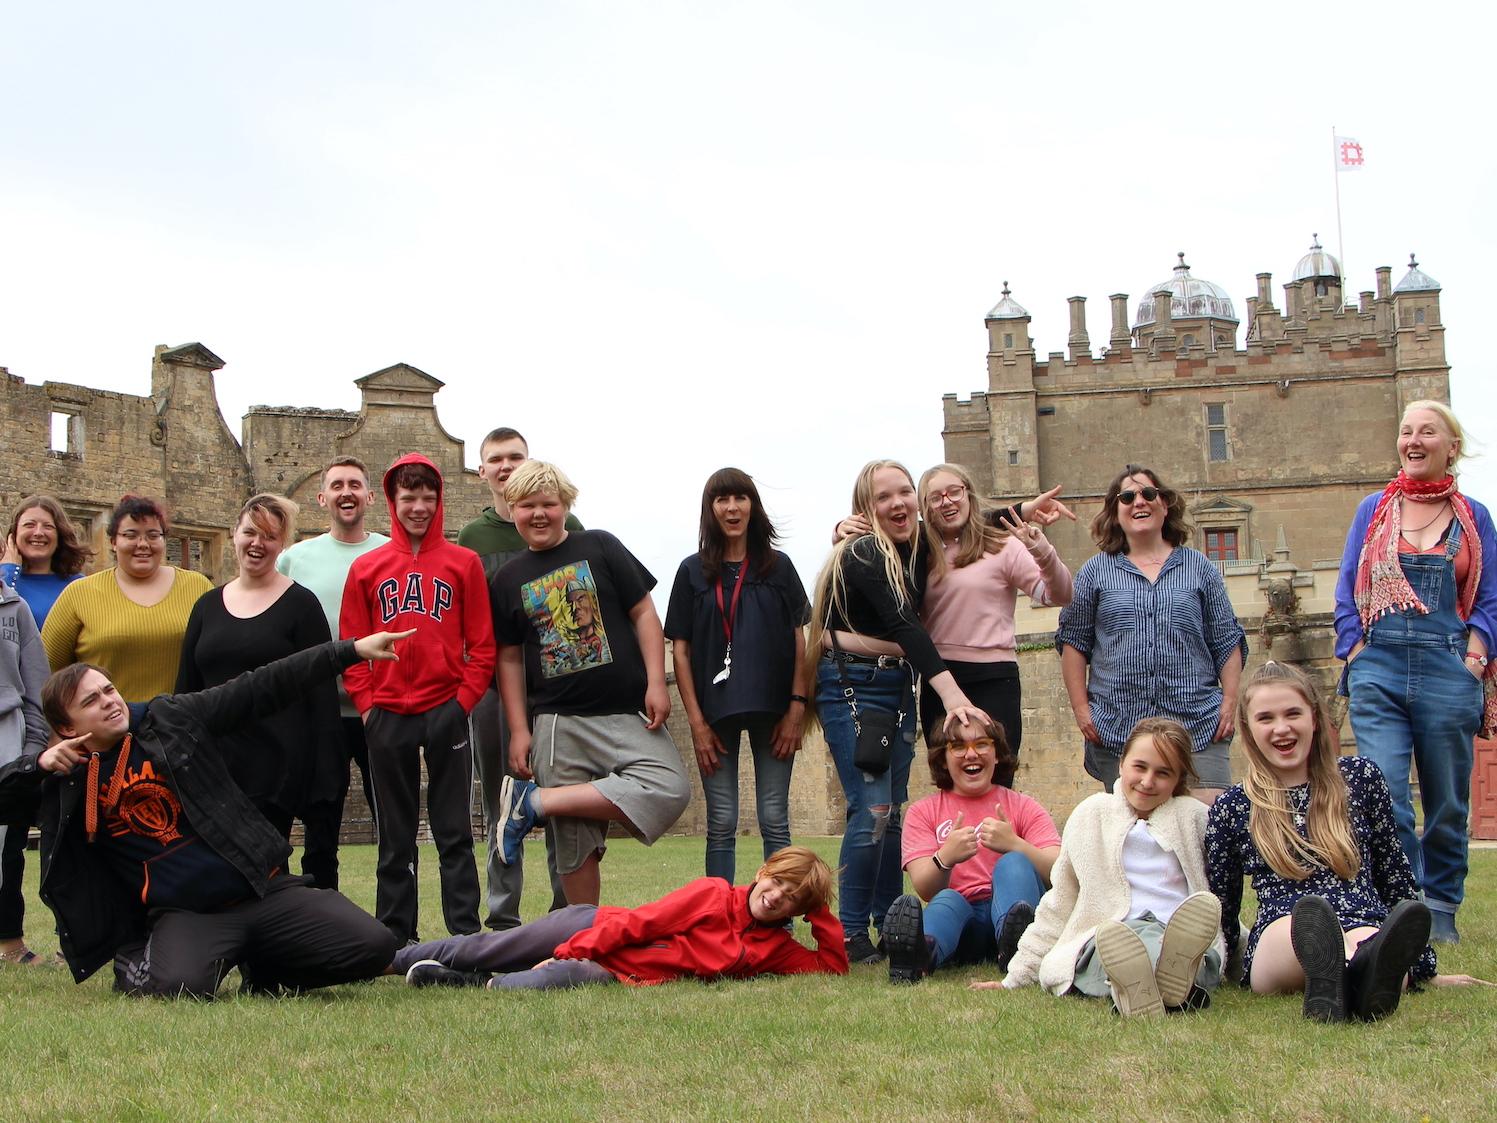 A large group of people pose for a photo outside at Bolsover Castle